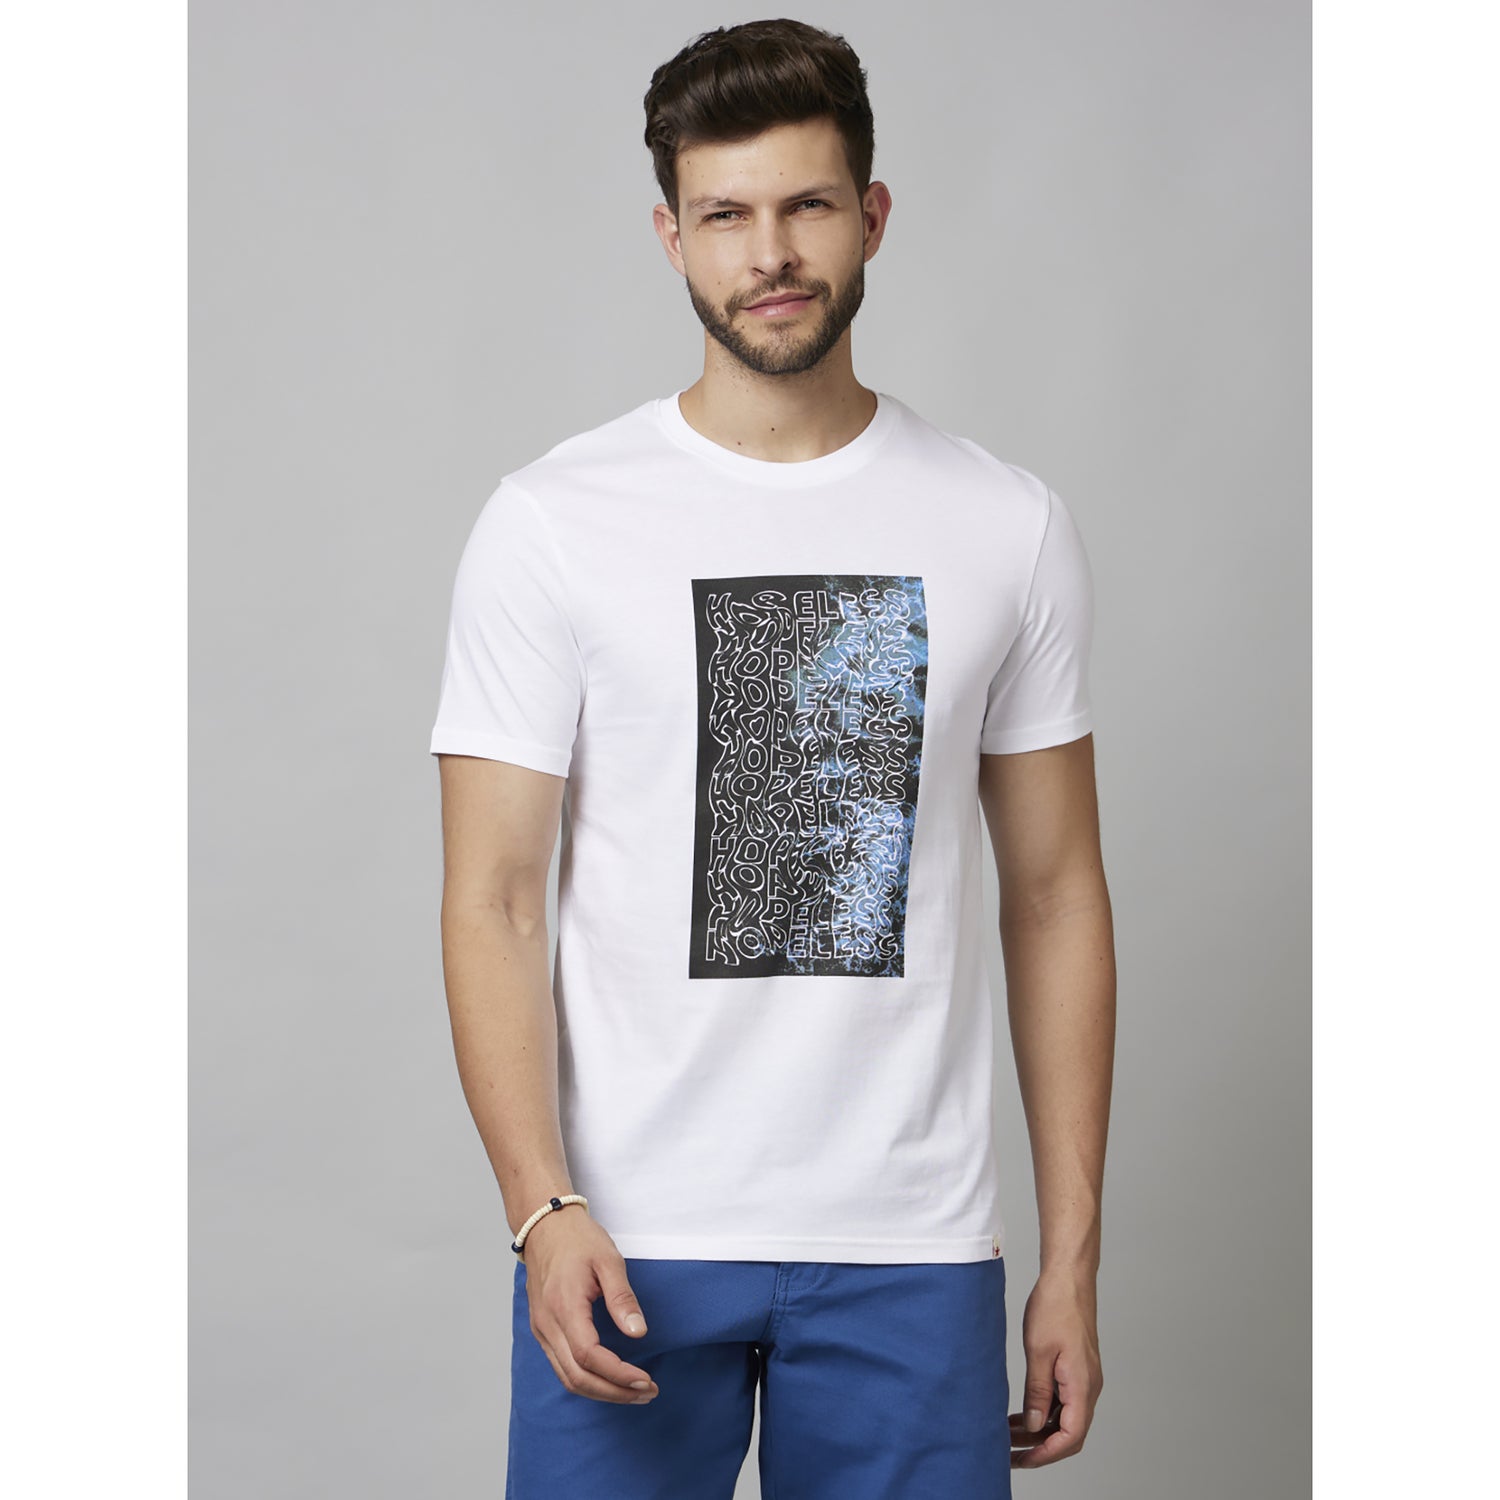 White Graphic Printed Short Sleeve Cotton T-Shirts (DEHOPE)